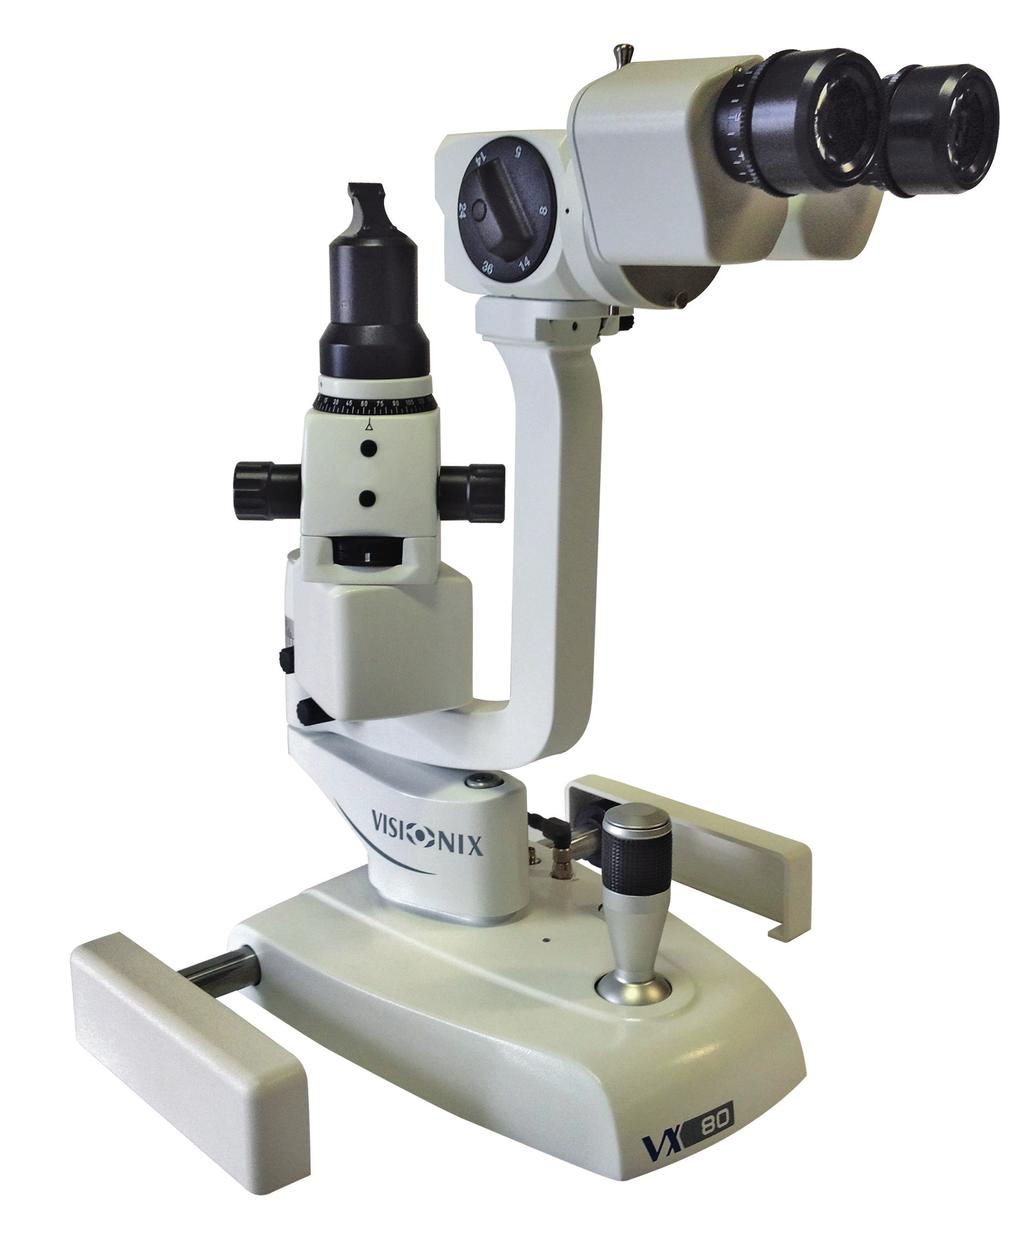 Compact Slit Lamps VX80 Cost effective reliable technology Converging 6 - magnifications Converging 6-5 magnifications REF. 8480-0001-0 REF.